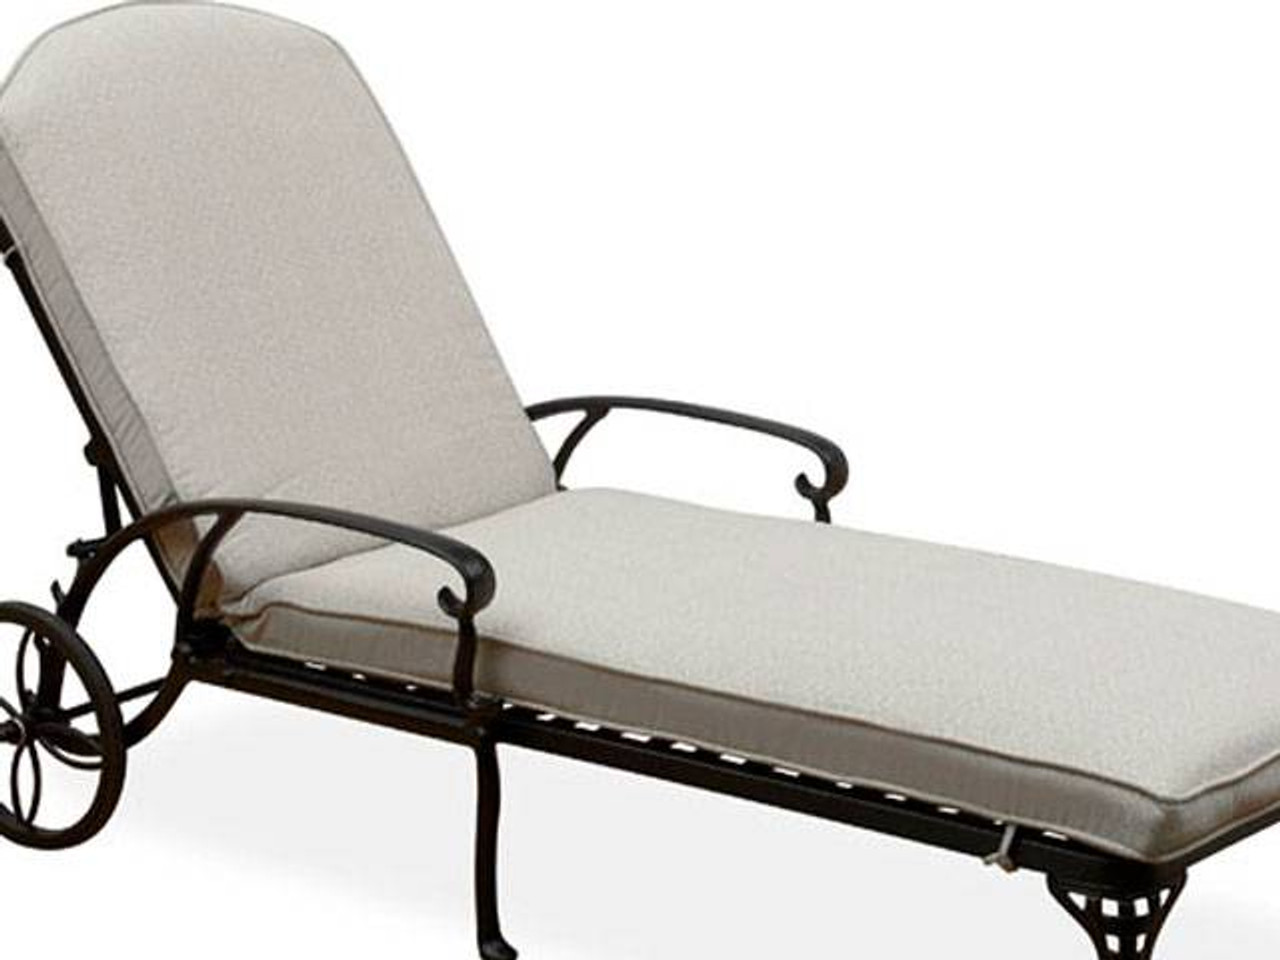 77 x 24"" Double Piping Chaise Cushion with Zipper in Silver Linen